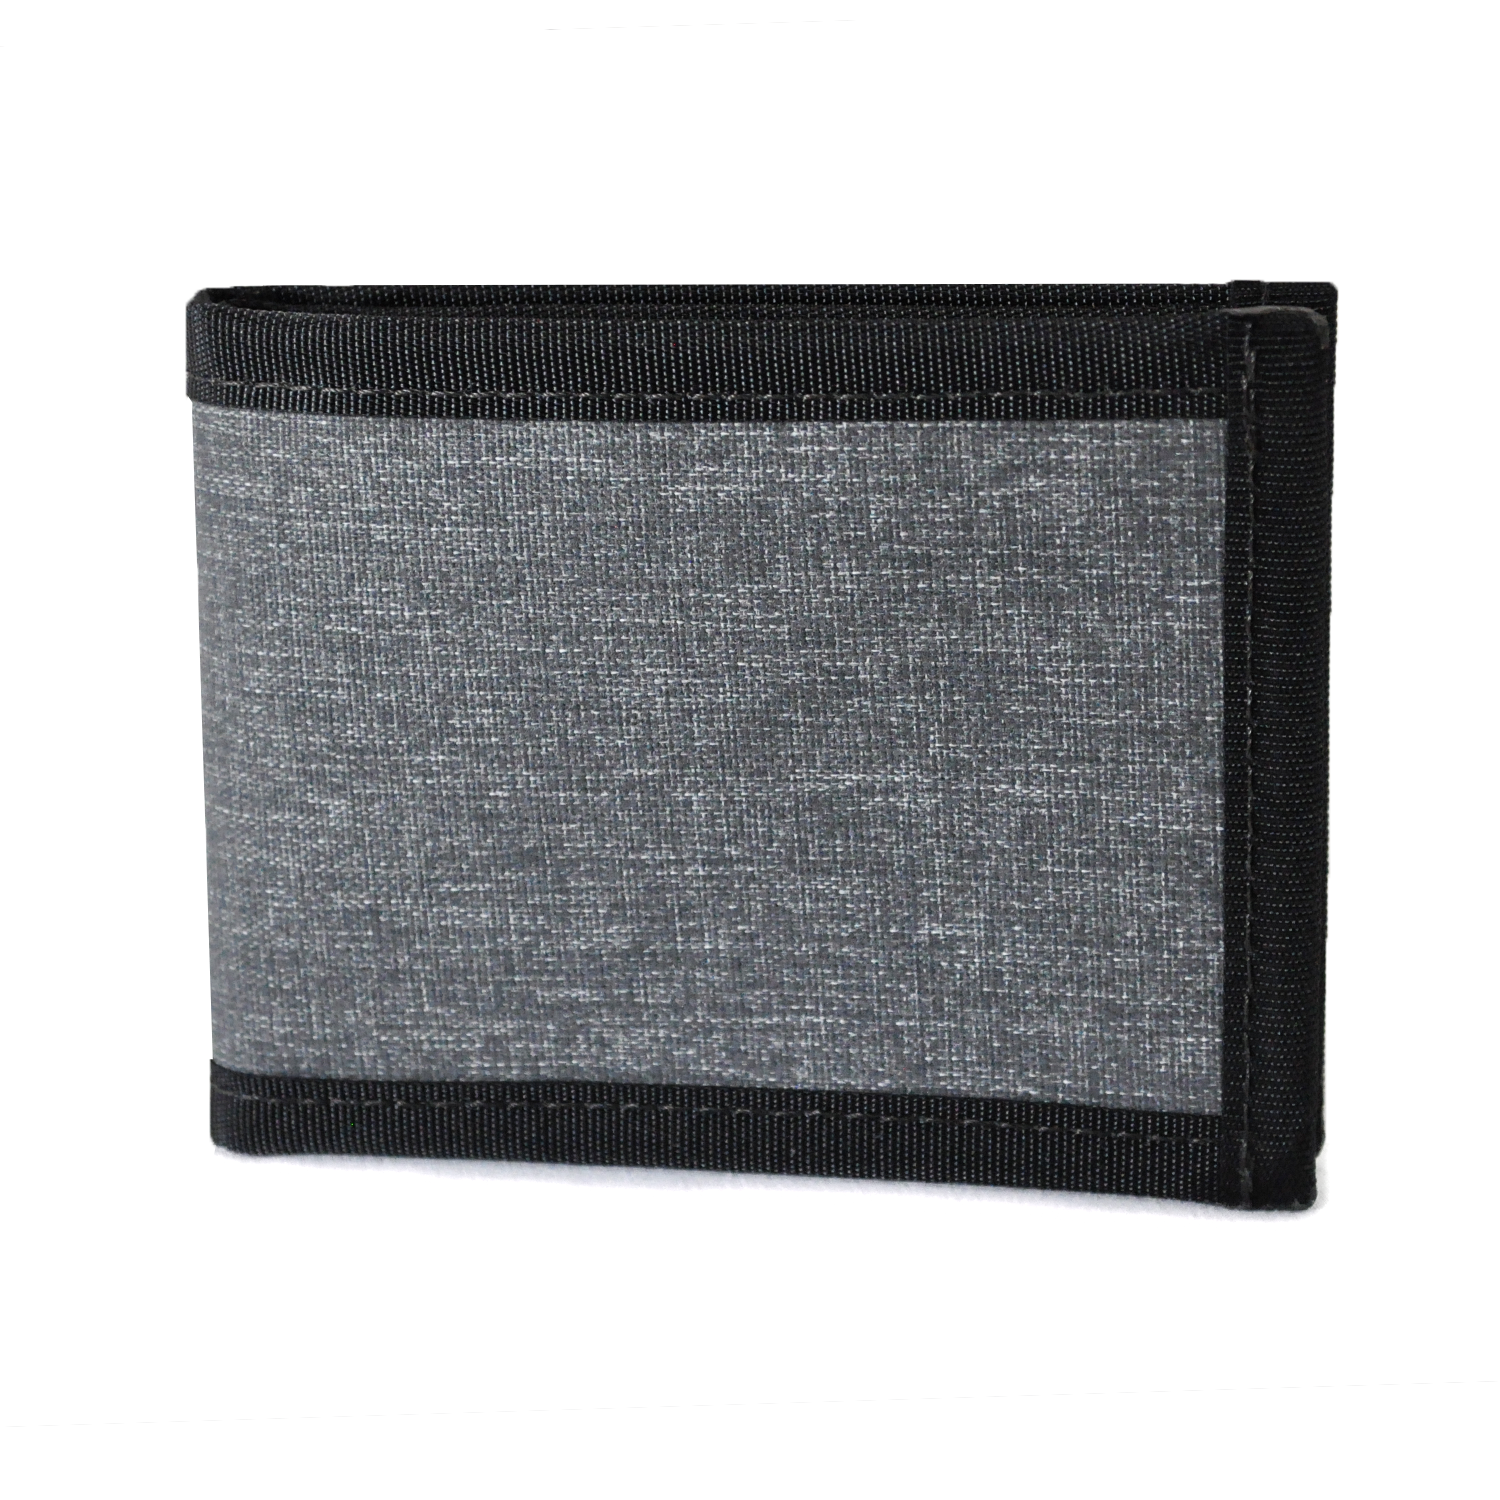 Flowfold Vanguard Bifold Wallet Made in USA, Maine by Flowfold of Recycled Polyester EcoPak Fabric Heather Grey